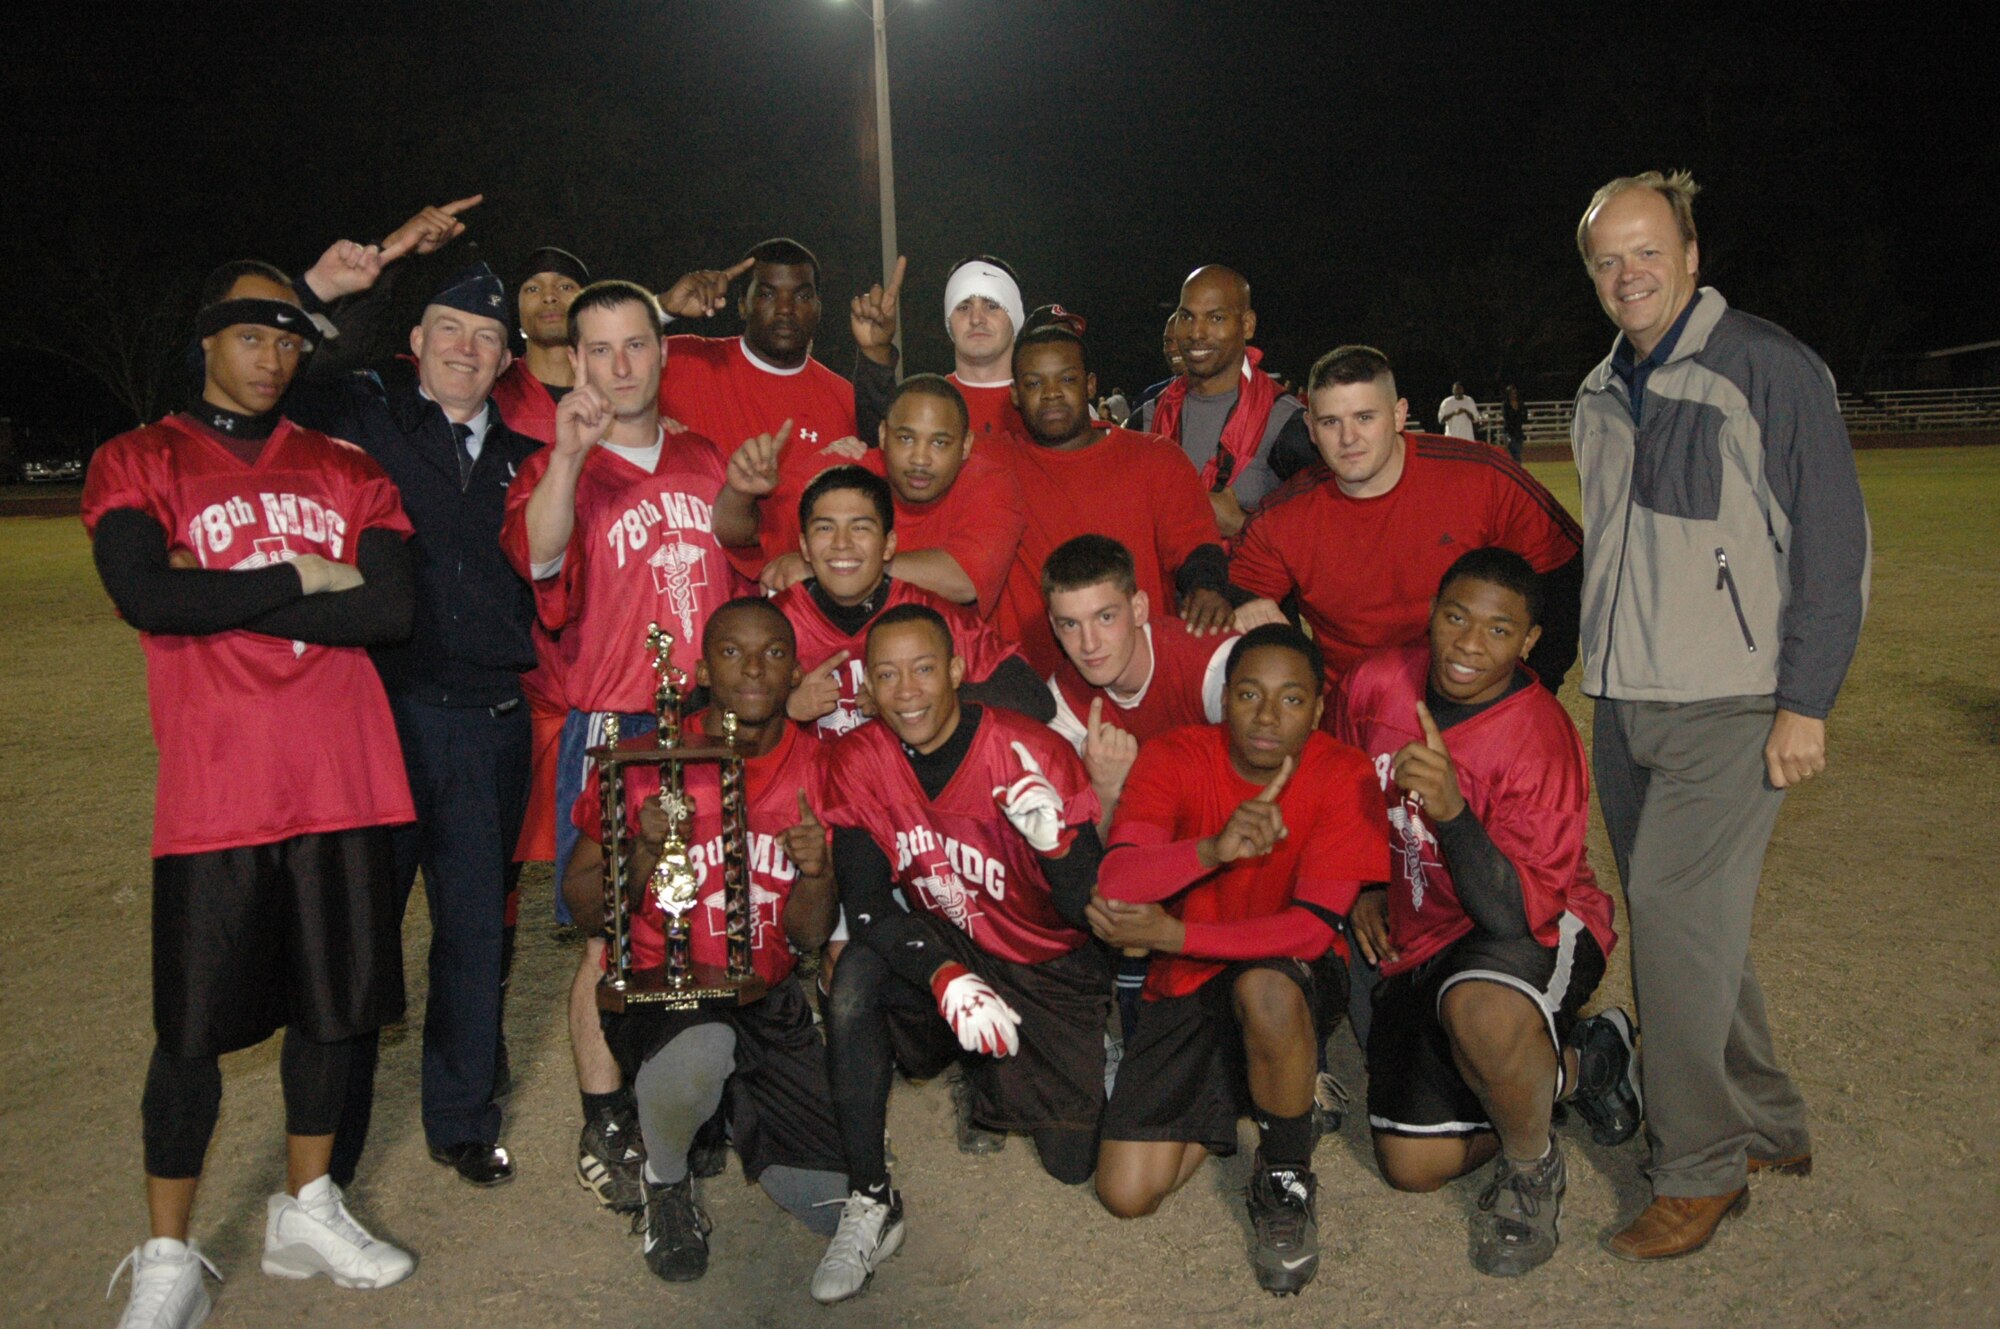 Flag Football championship winners were the 78th Medical  Group. Second place was the 78th Security Forces Squadron and third place was the 581st SMXG.  U. S. Air Force photo by Sue Sapp